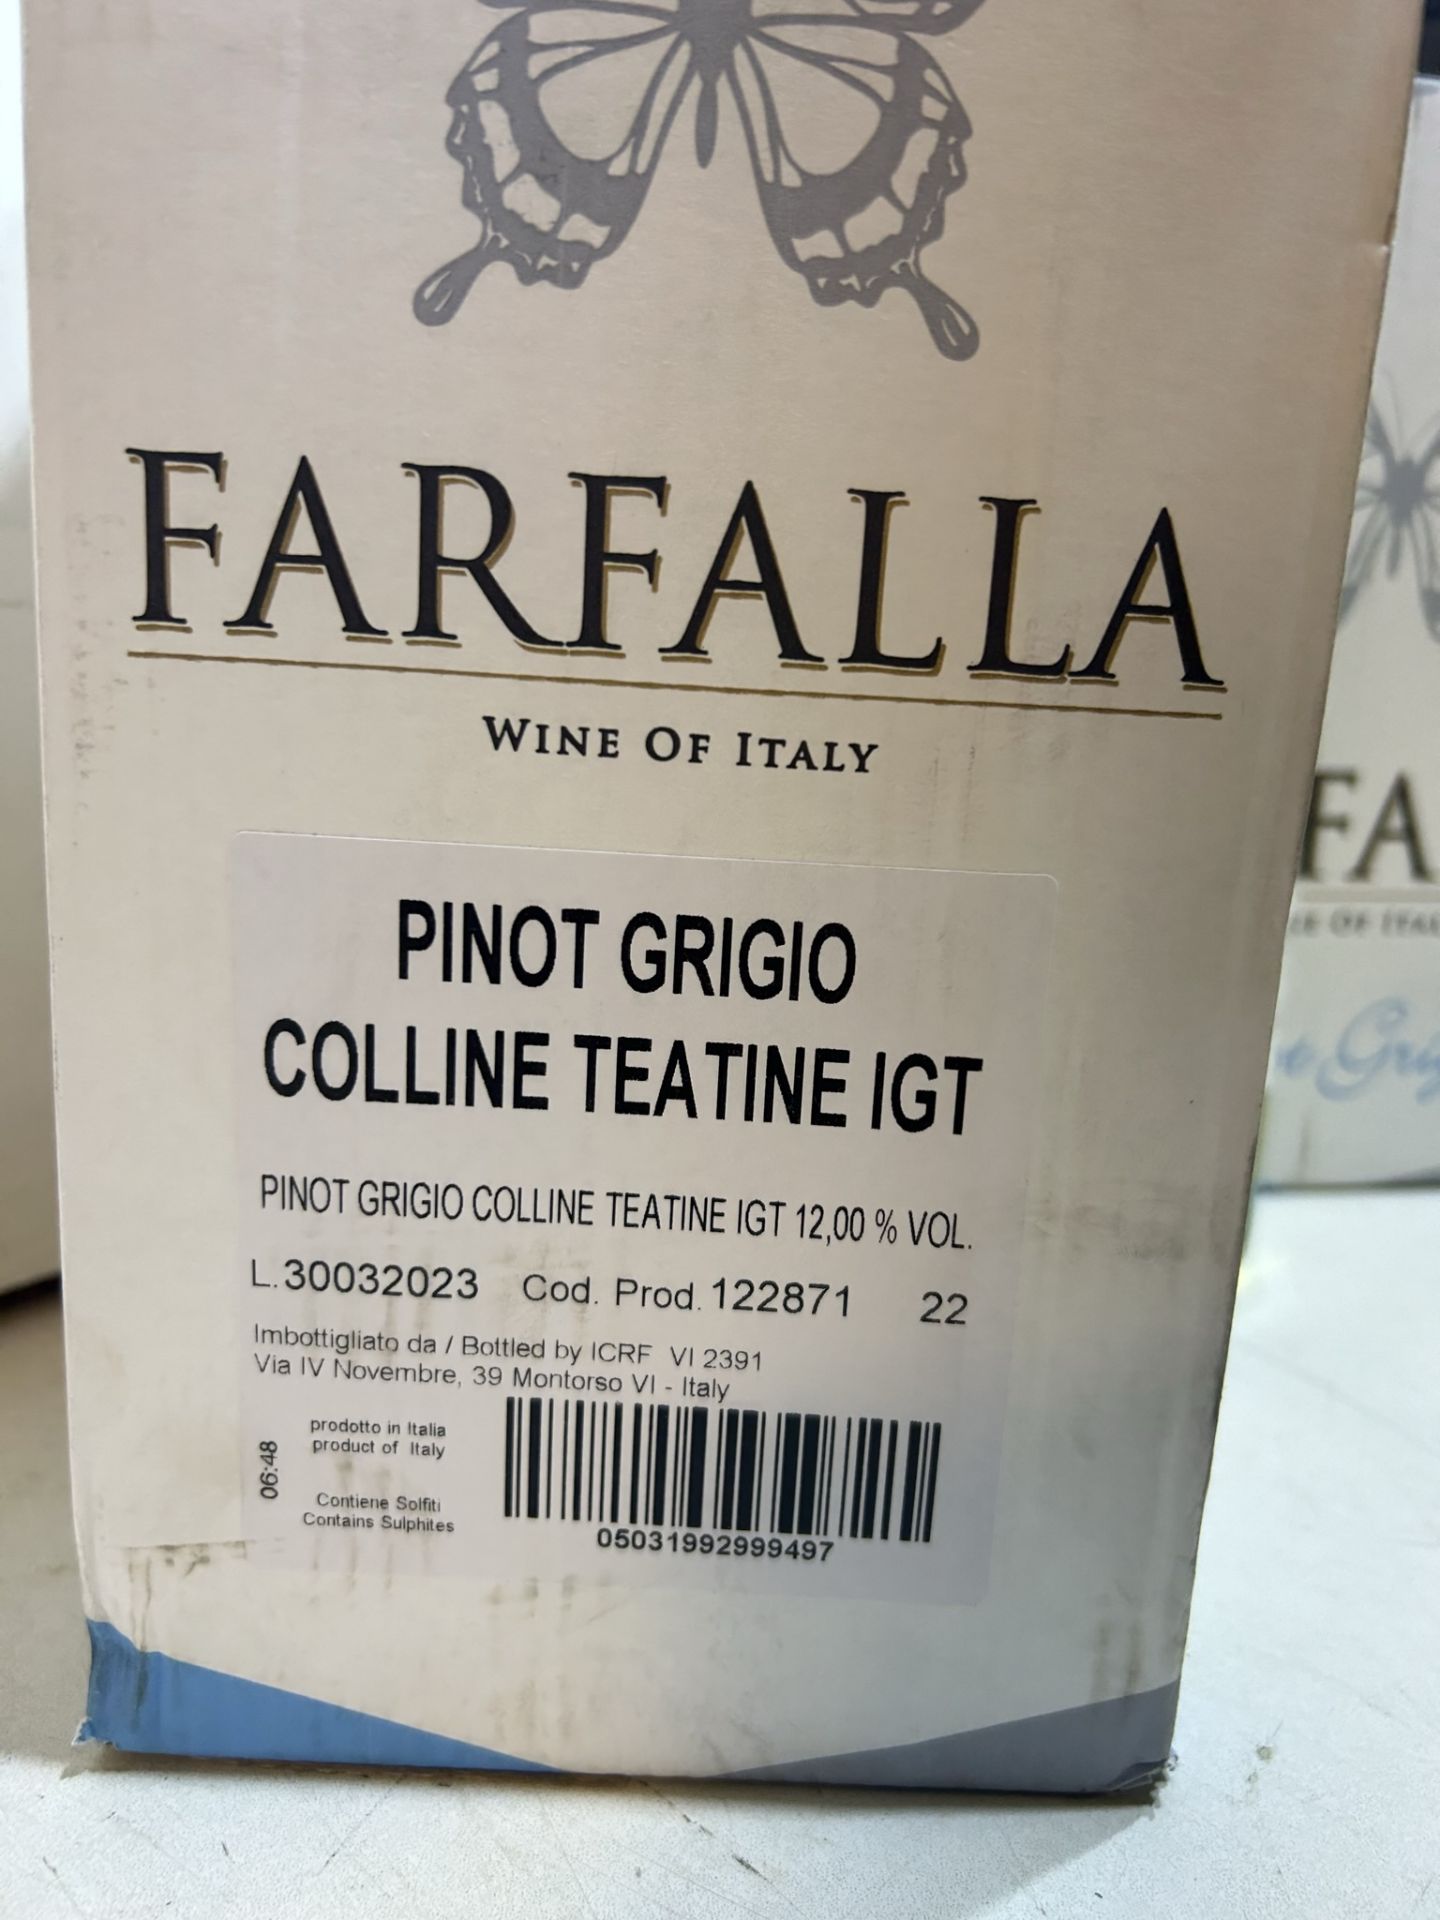 4 x Crates of Farfalla Pinot Grigio Wine & 18 x Loose Bottles (42 x Bottles in Total) - Image 6 of 8